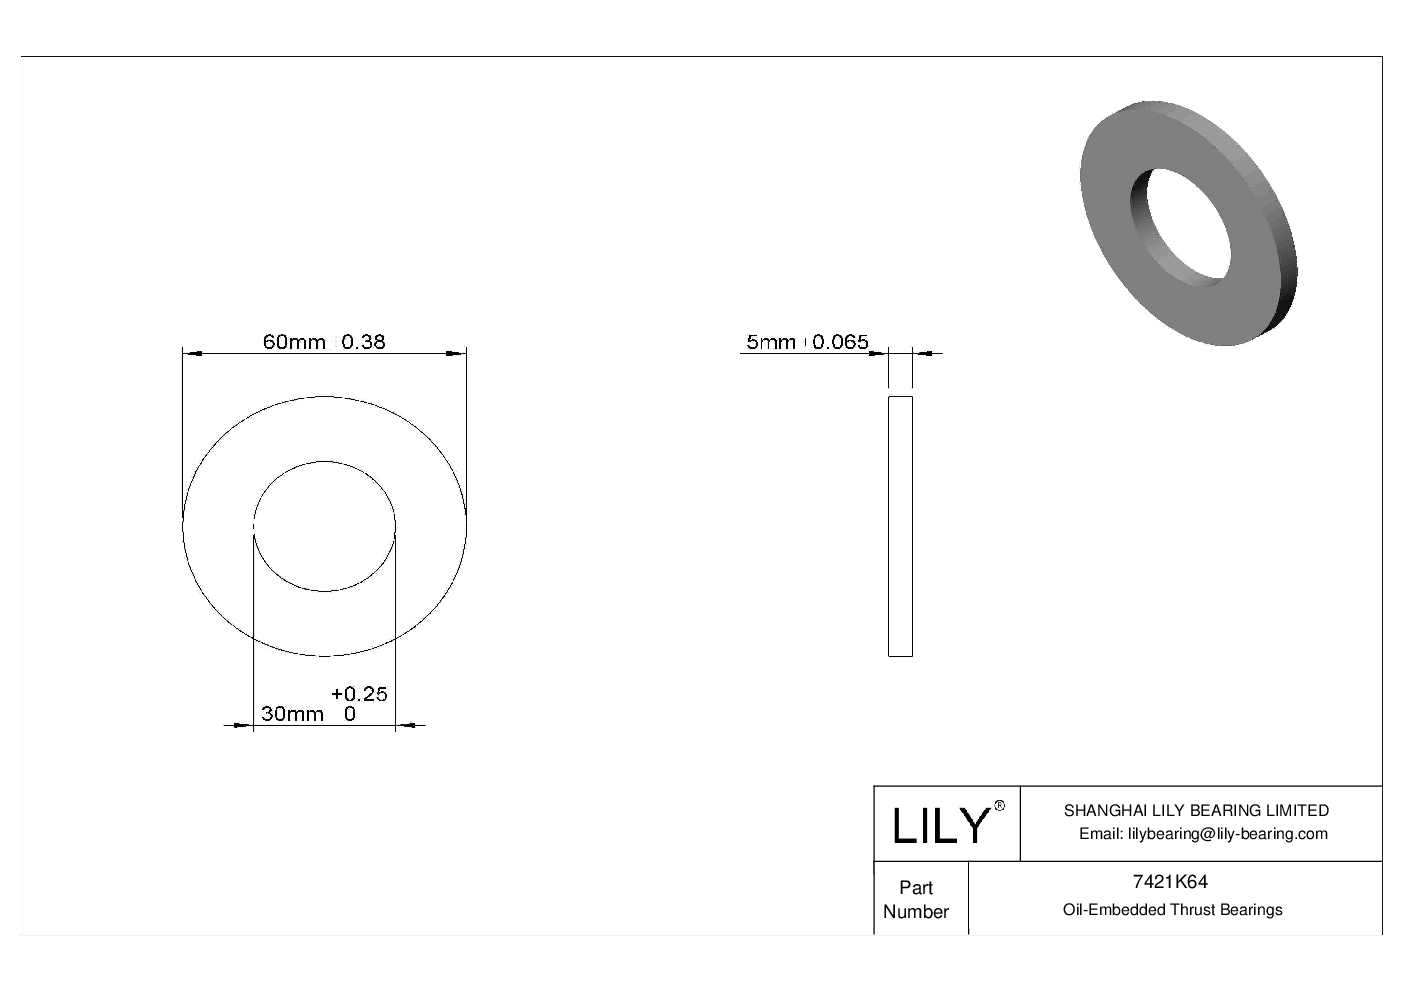 HECBKGE Ultra-Low-Friction Oil-Embedded Thrust Bearings cad drawing